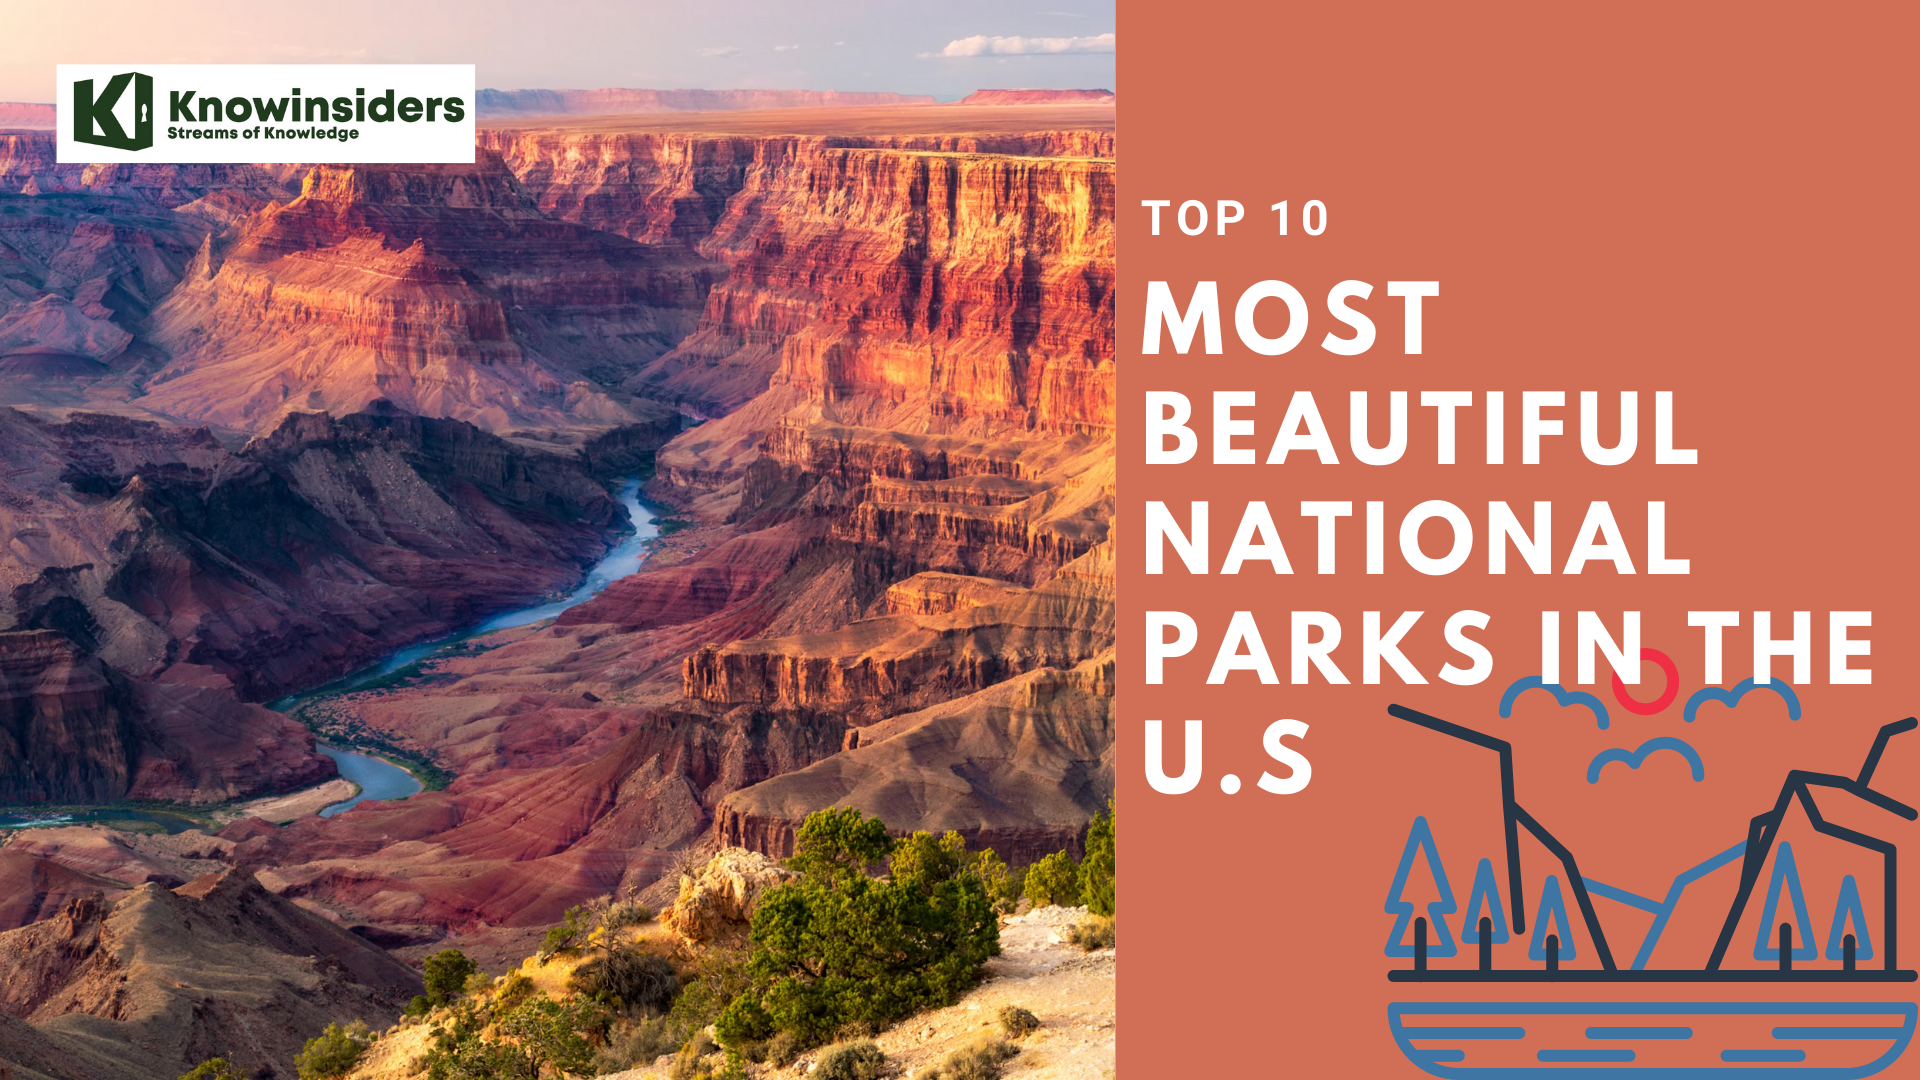 Top 10 most beautiful national parks in the U.S 